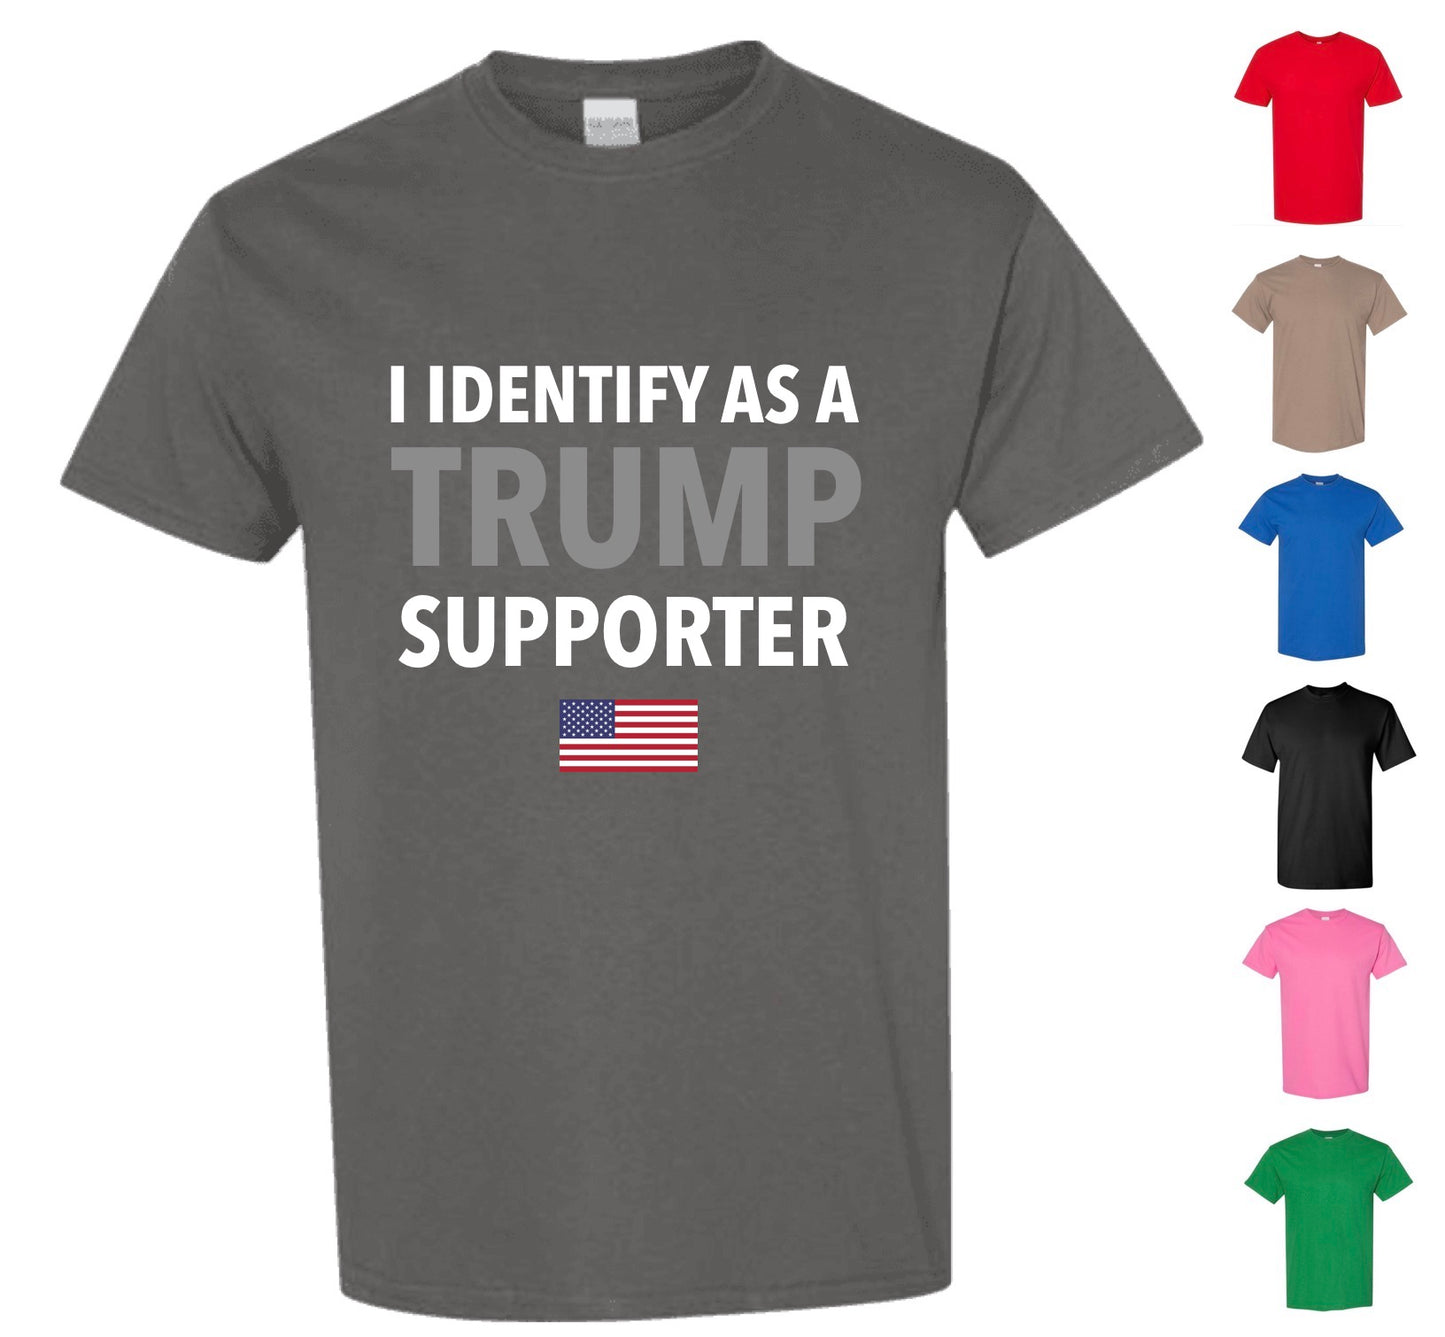 I Identify As A Trump Supporter — Free Shipping!